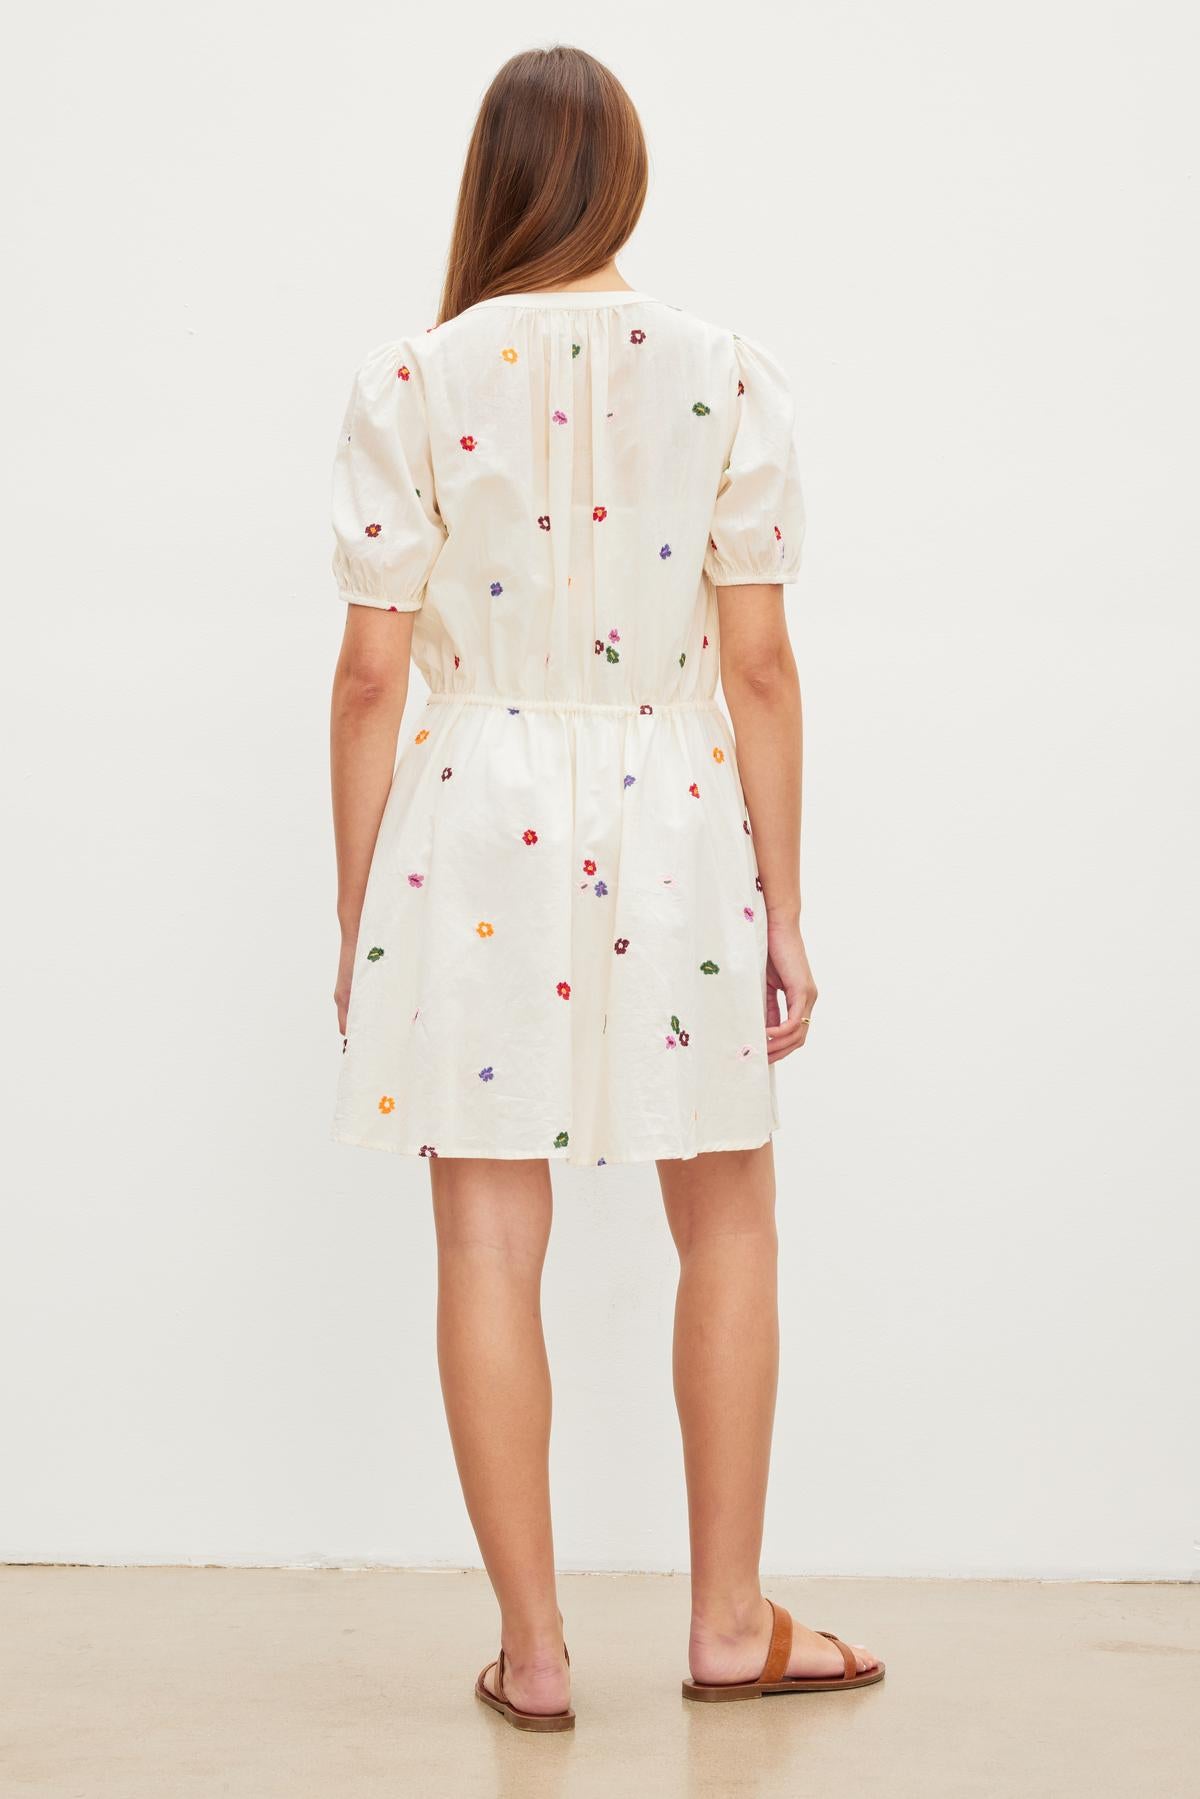 Woman standing with her back to the camera, wearing a short white CLEO EMBROIDERED BOHO DRESS by Velvet by Graham & Spencer with multicolored floral embroidery and a drawstring waist, against a plain white background.-35955682279617